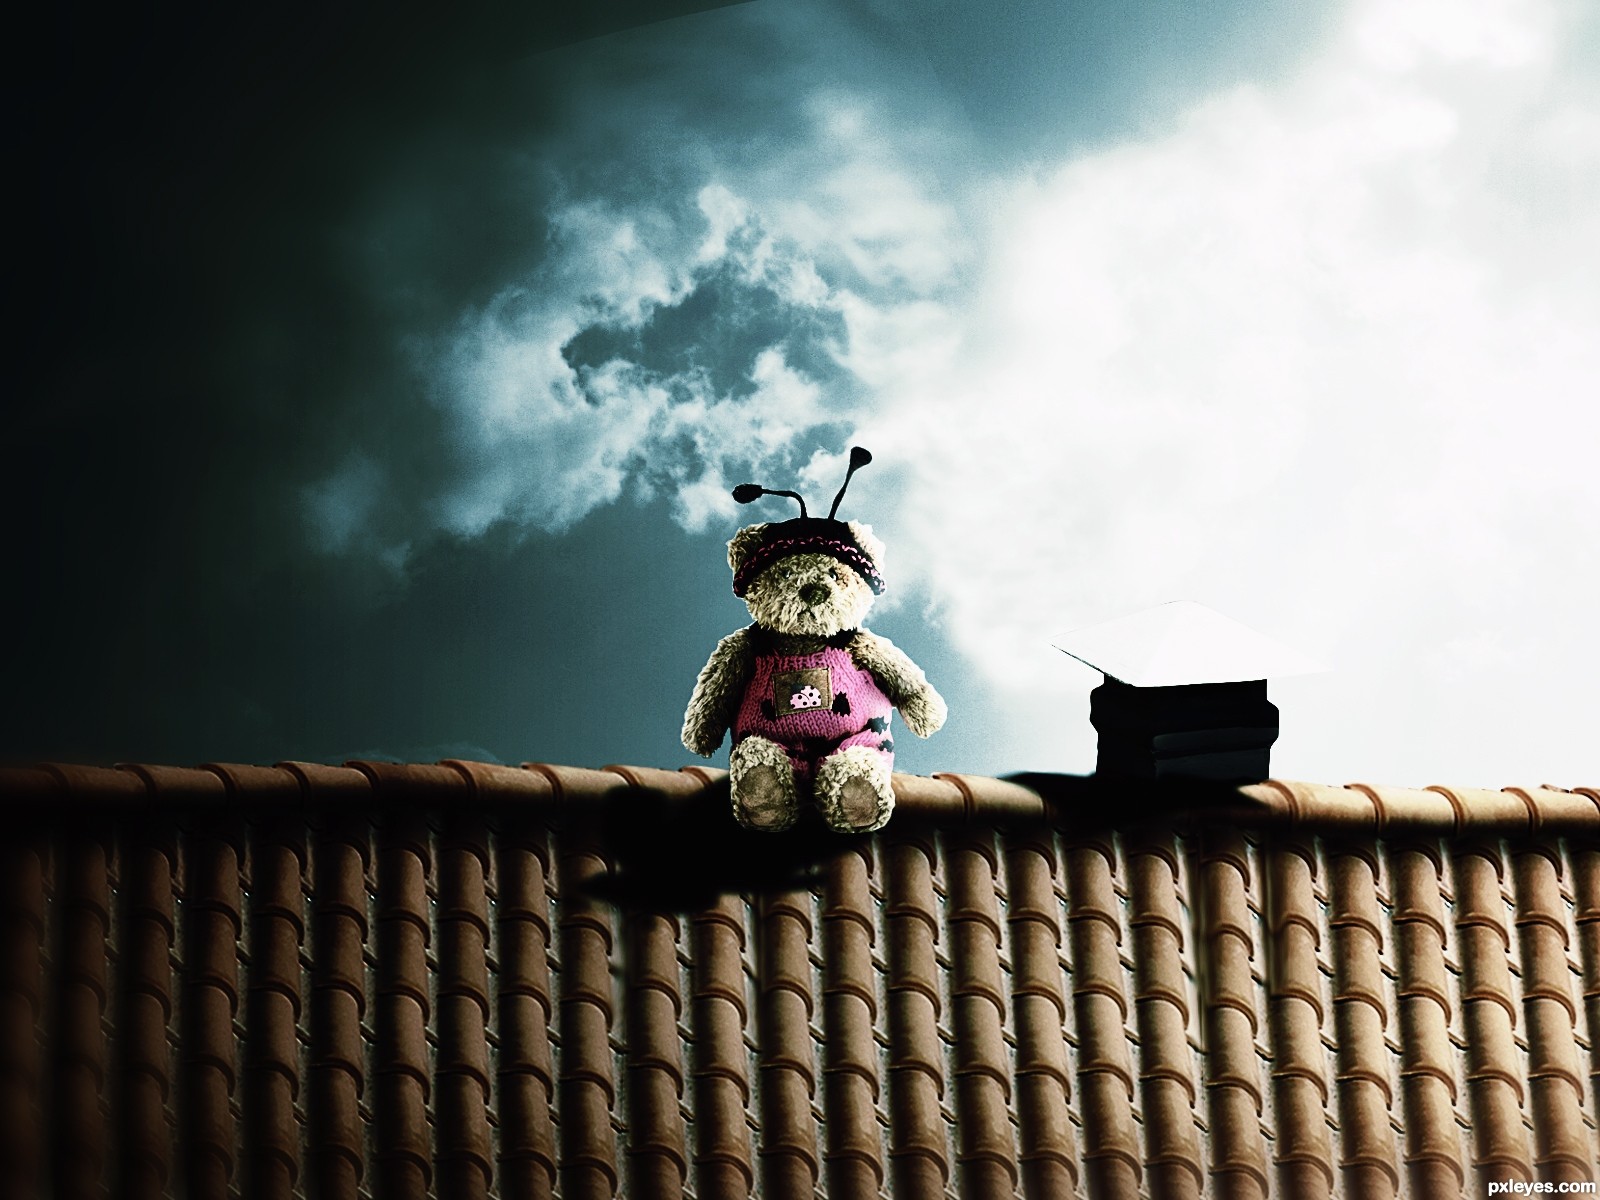 poo on the roof picture, by itsdesign for: rooftop photoshop contest ...